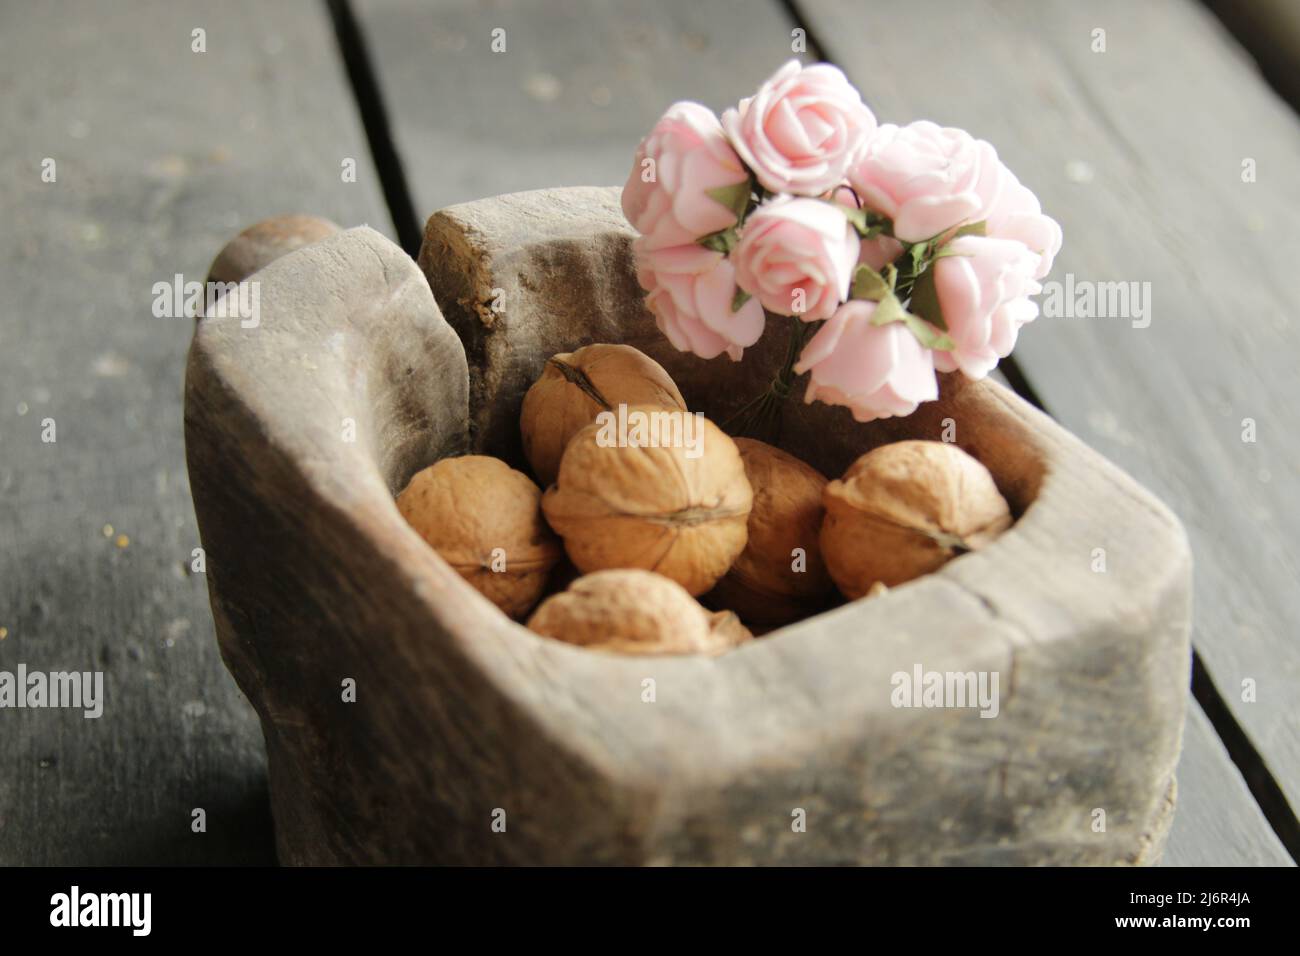 Healthy food. Beautiful flowers and walnuts in a wooden box. Stock Photo